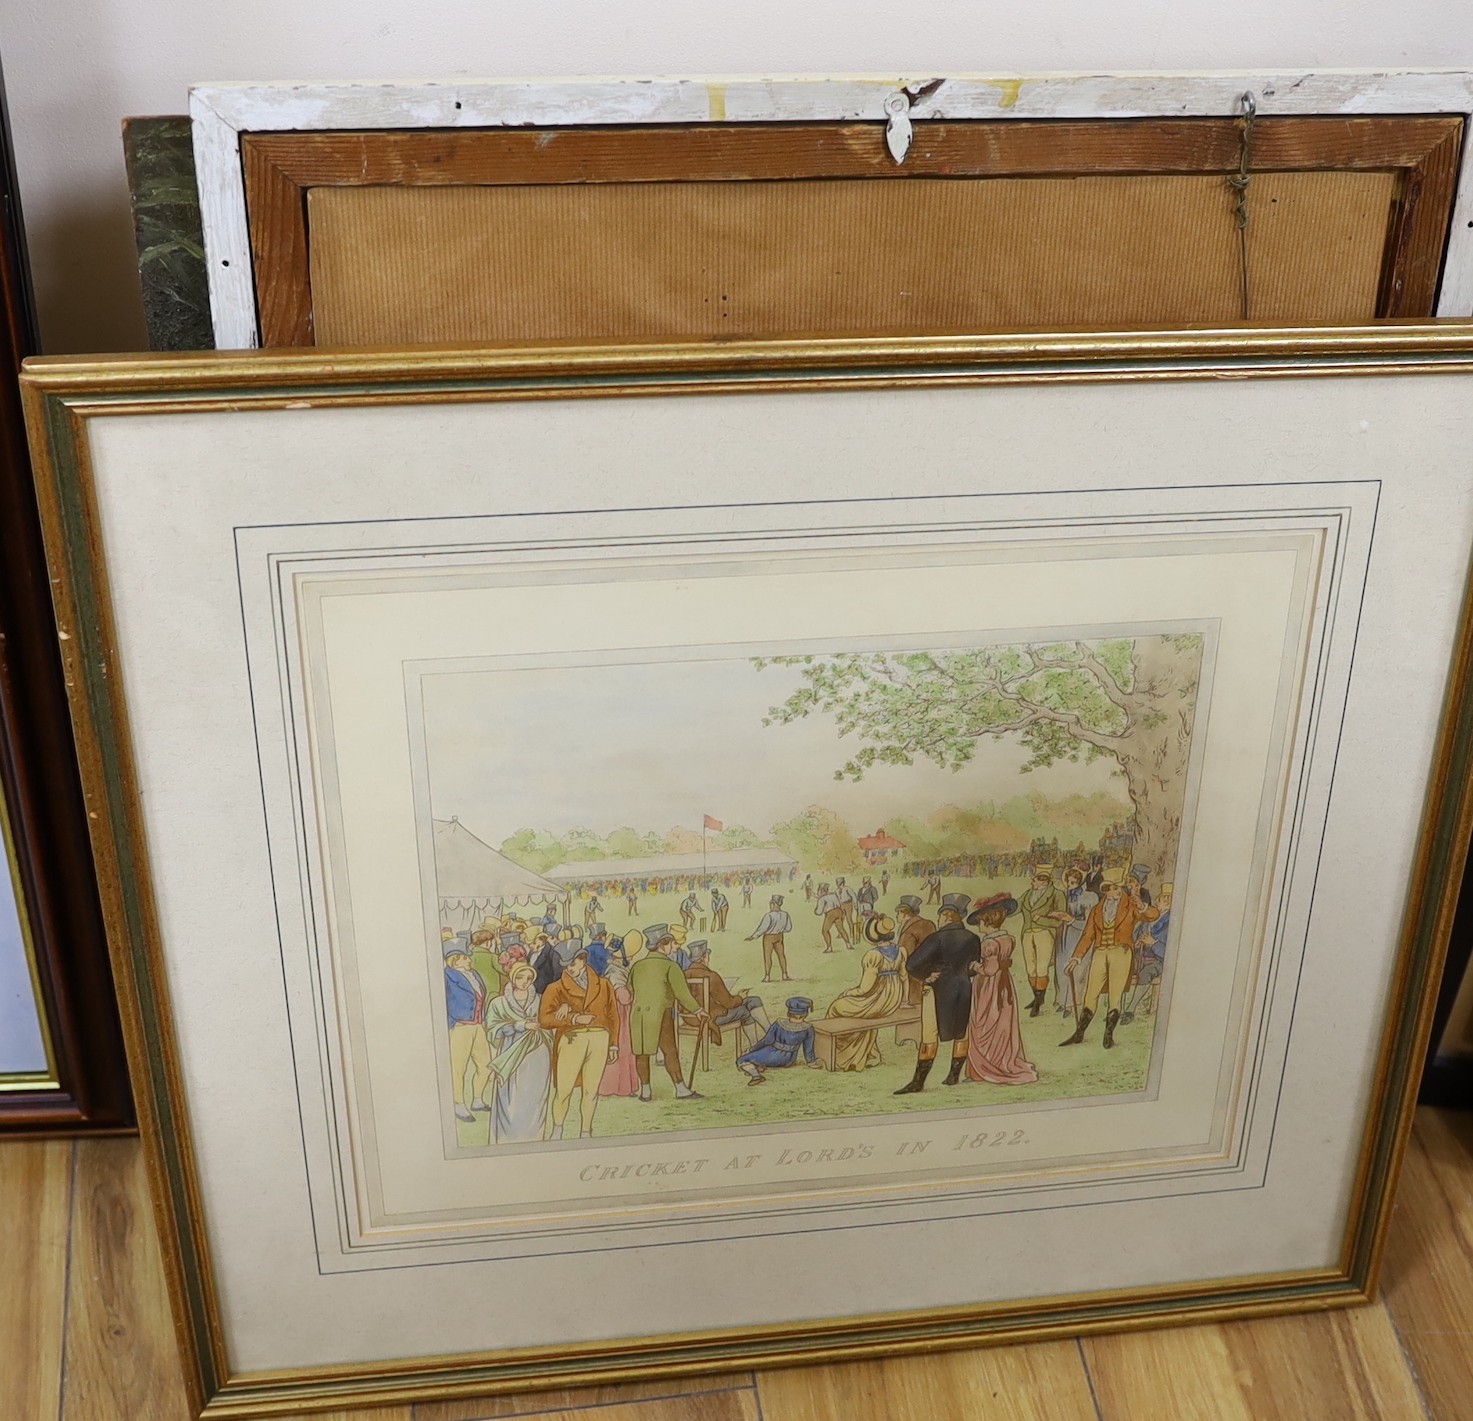 Leadenhall Press, coloured engraving, 'Cricket at Lords in 1822', 31 x 40cm, and a group of assorted paintings and prints